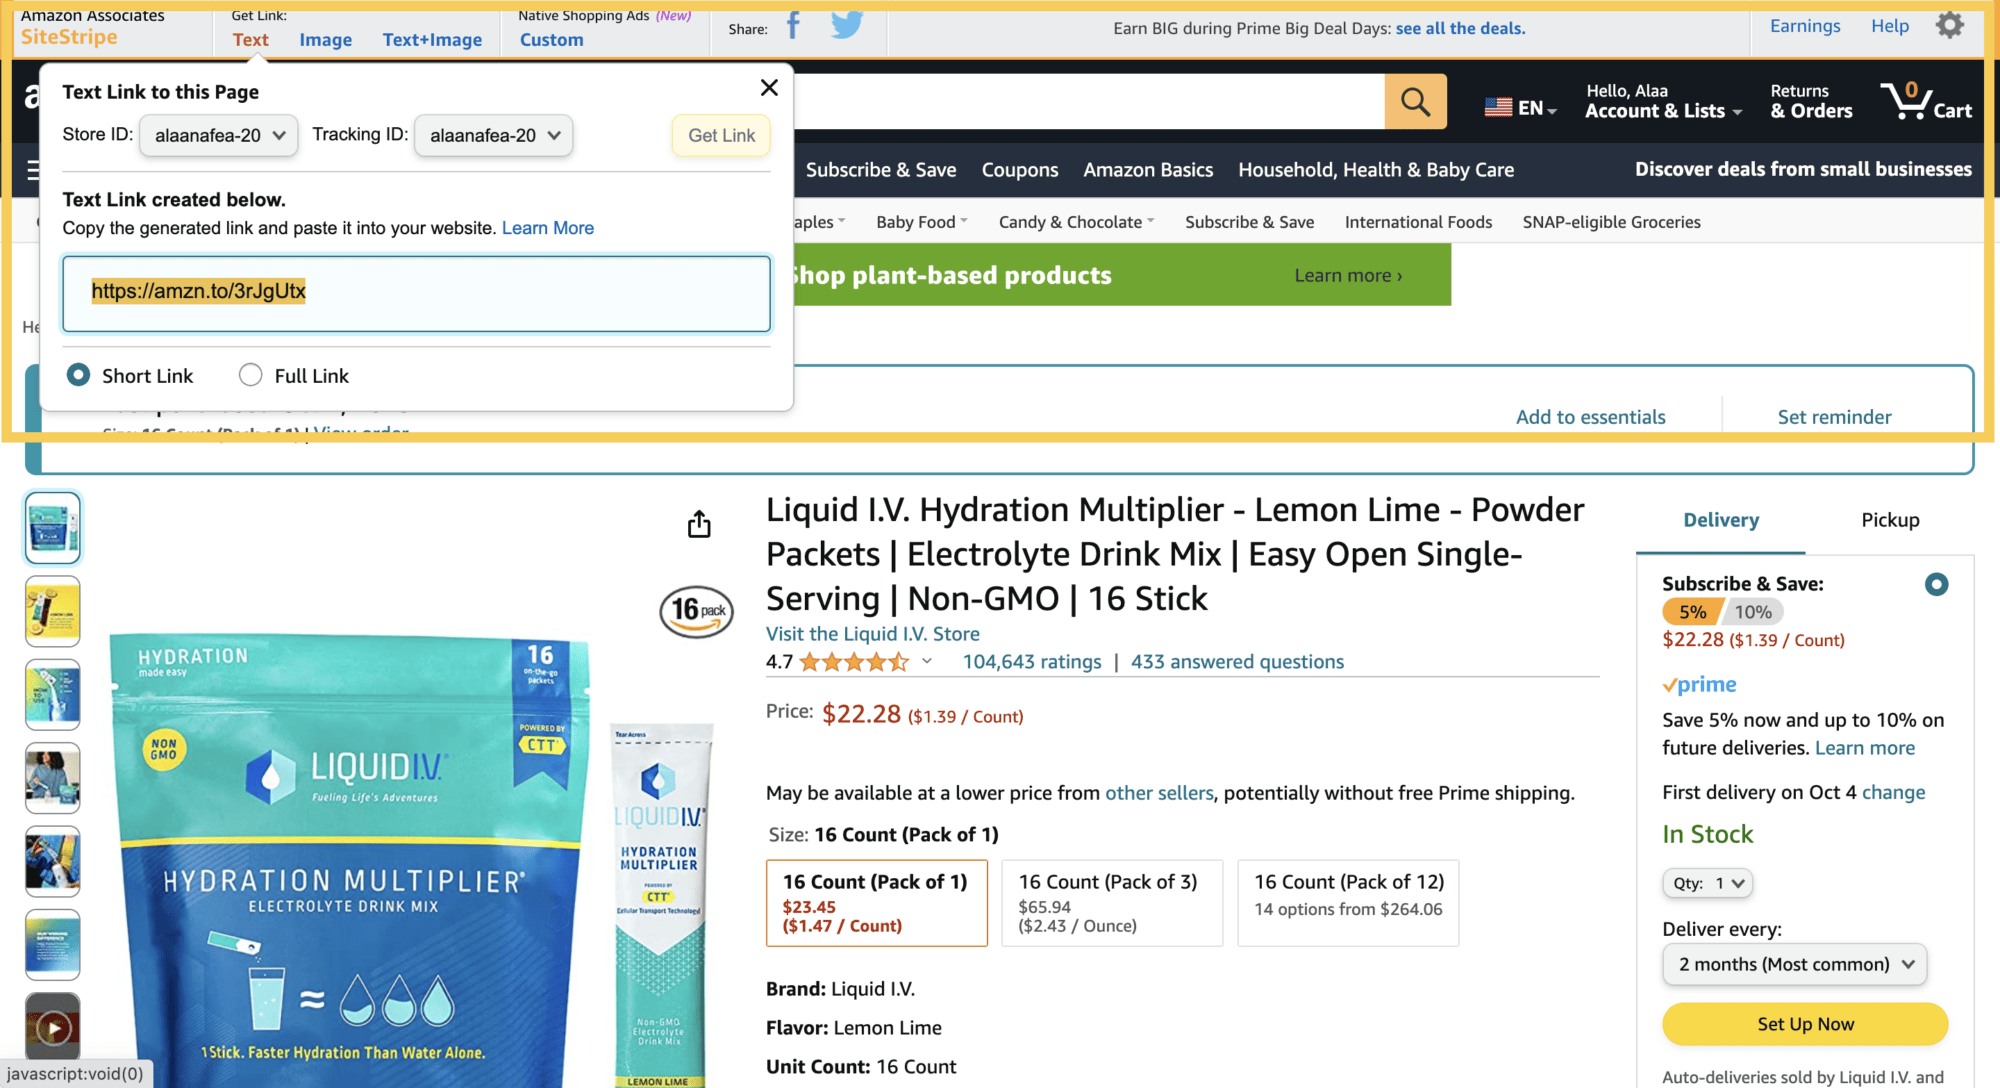 Amazon allows creators to generate commissionable link in the Liquid IV product page